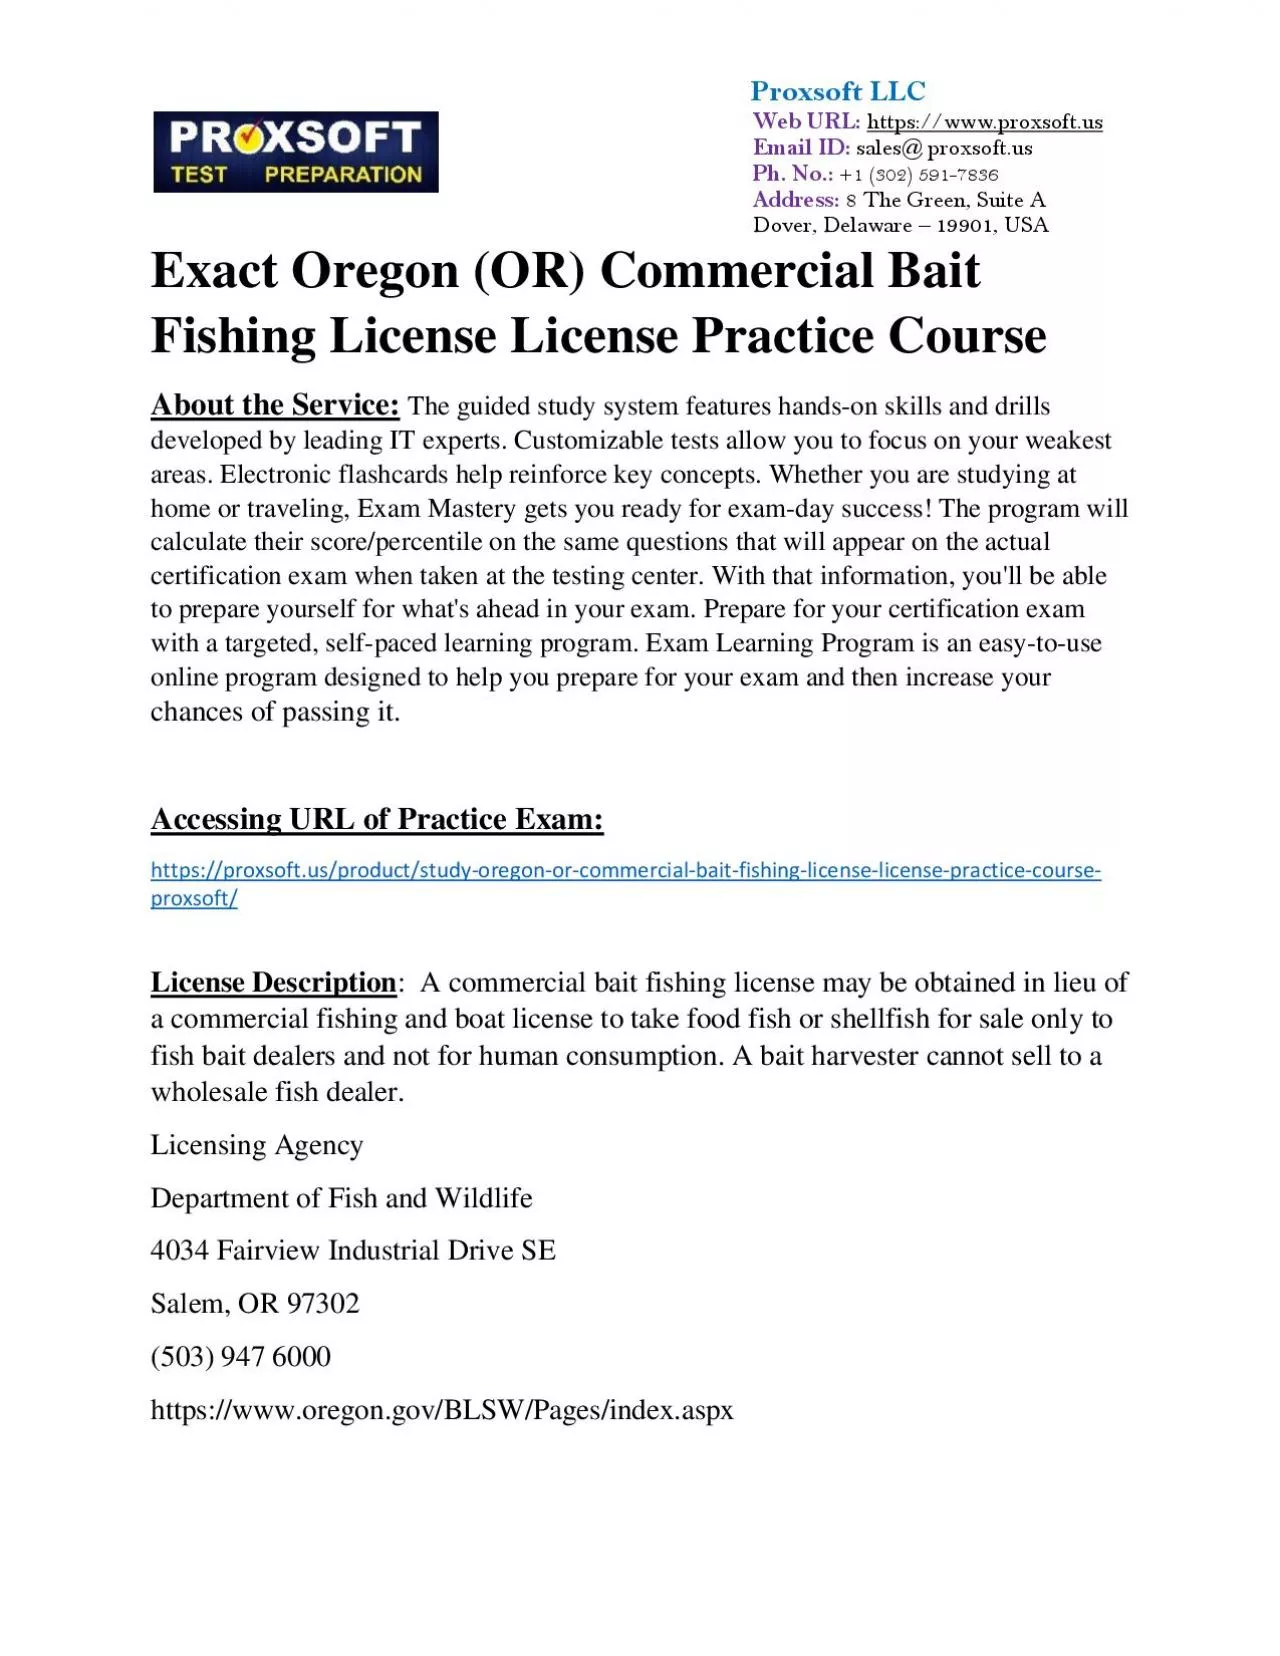 Exact Oregon (OR) Commercial Bait Fishing License License Practice Course